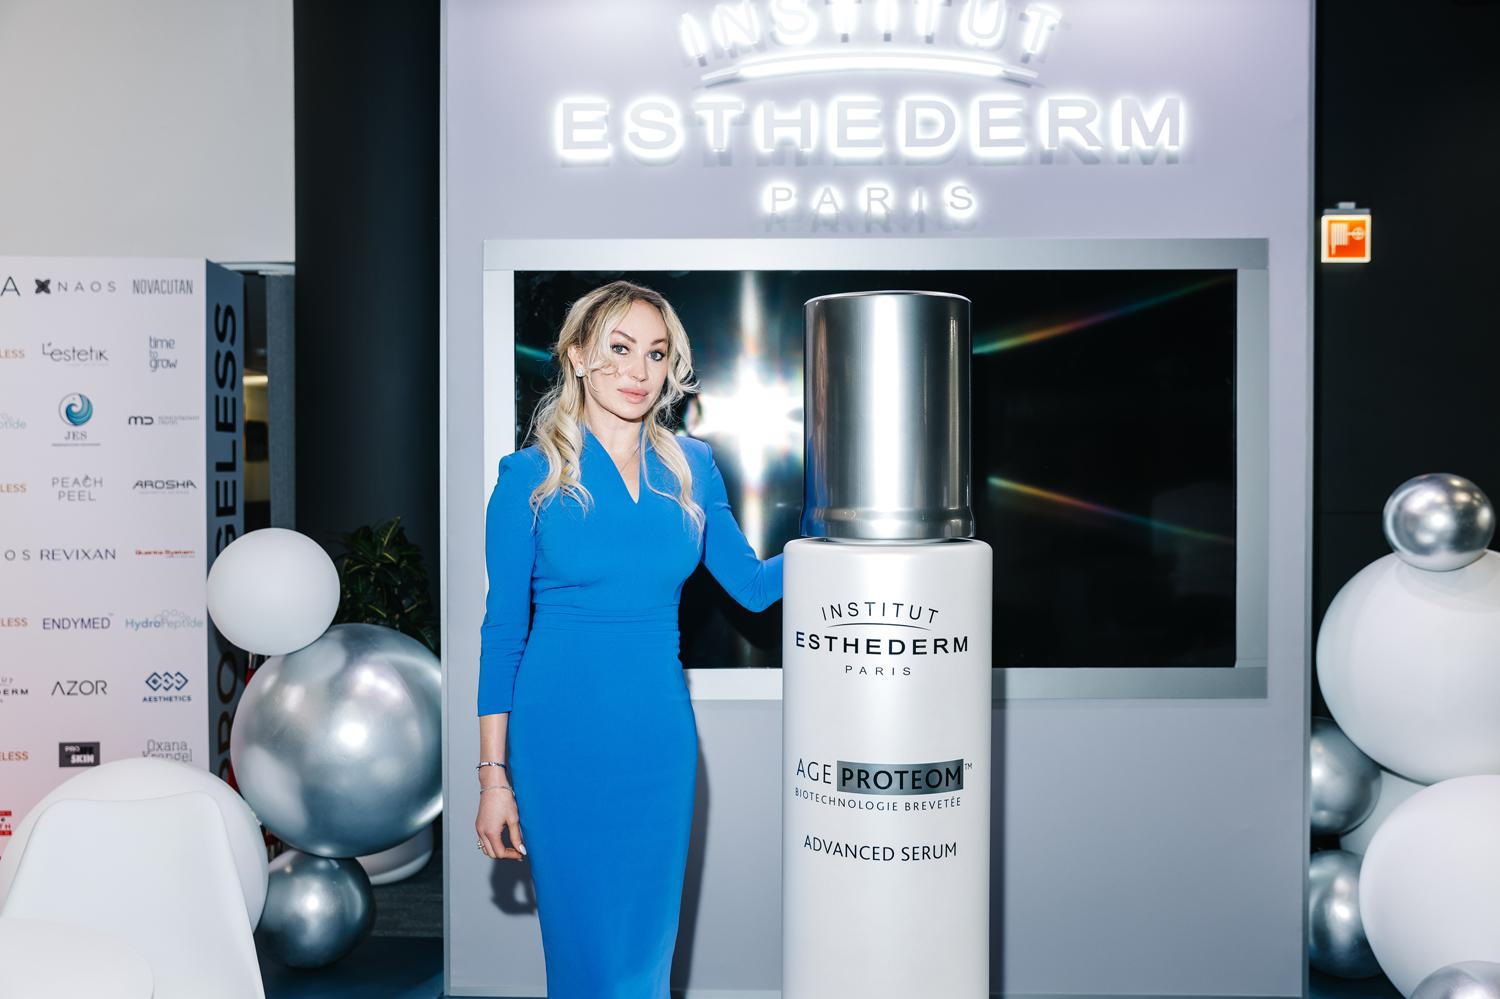 Alena Syromytskaya, Russian and international expert, dermatovenerologist, cosmetologist, founder and chief physician of the Professional cosmetology clinic, founder of the Academy Advance Professional UCC and the Pro-Ageless congress next to the Age Proteom stand from Institut Esthederm